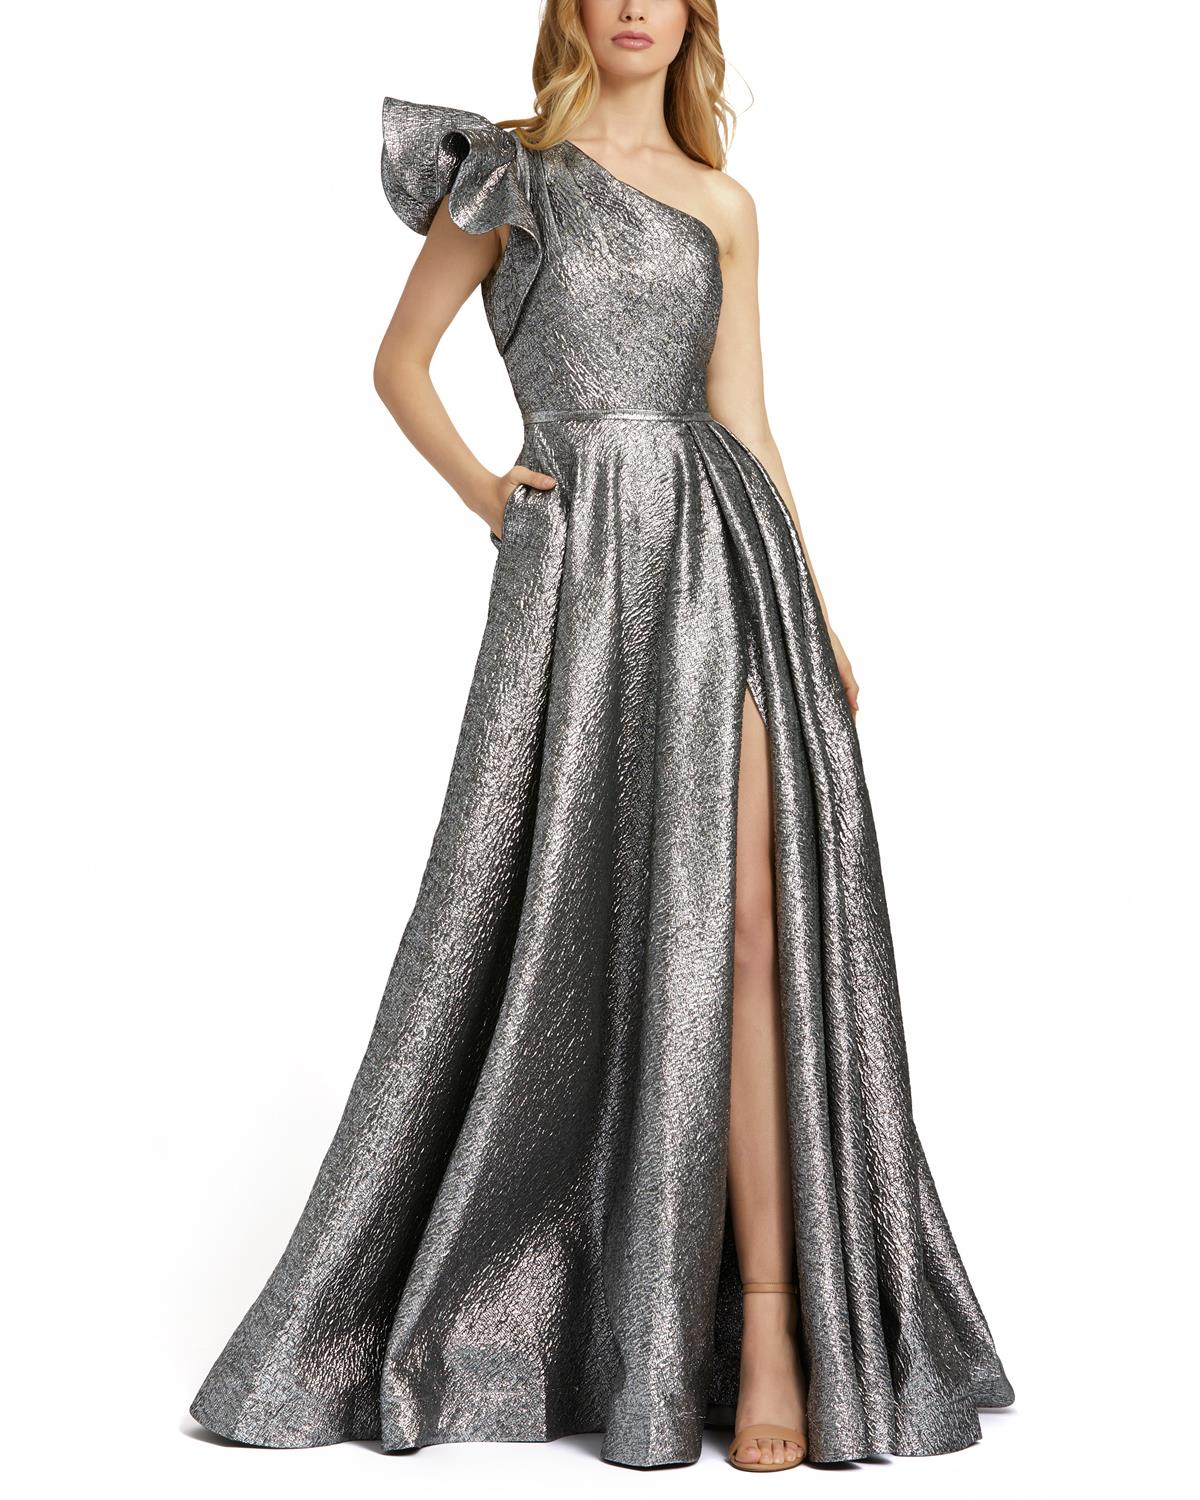 4 One Shoulder Gown